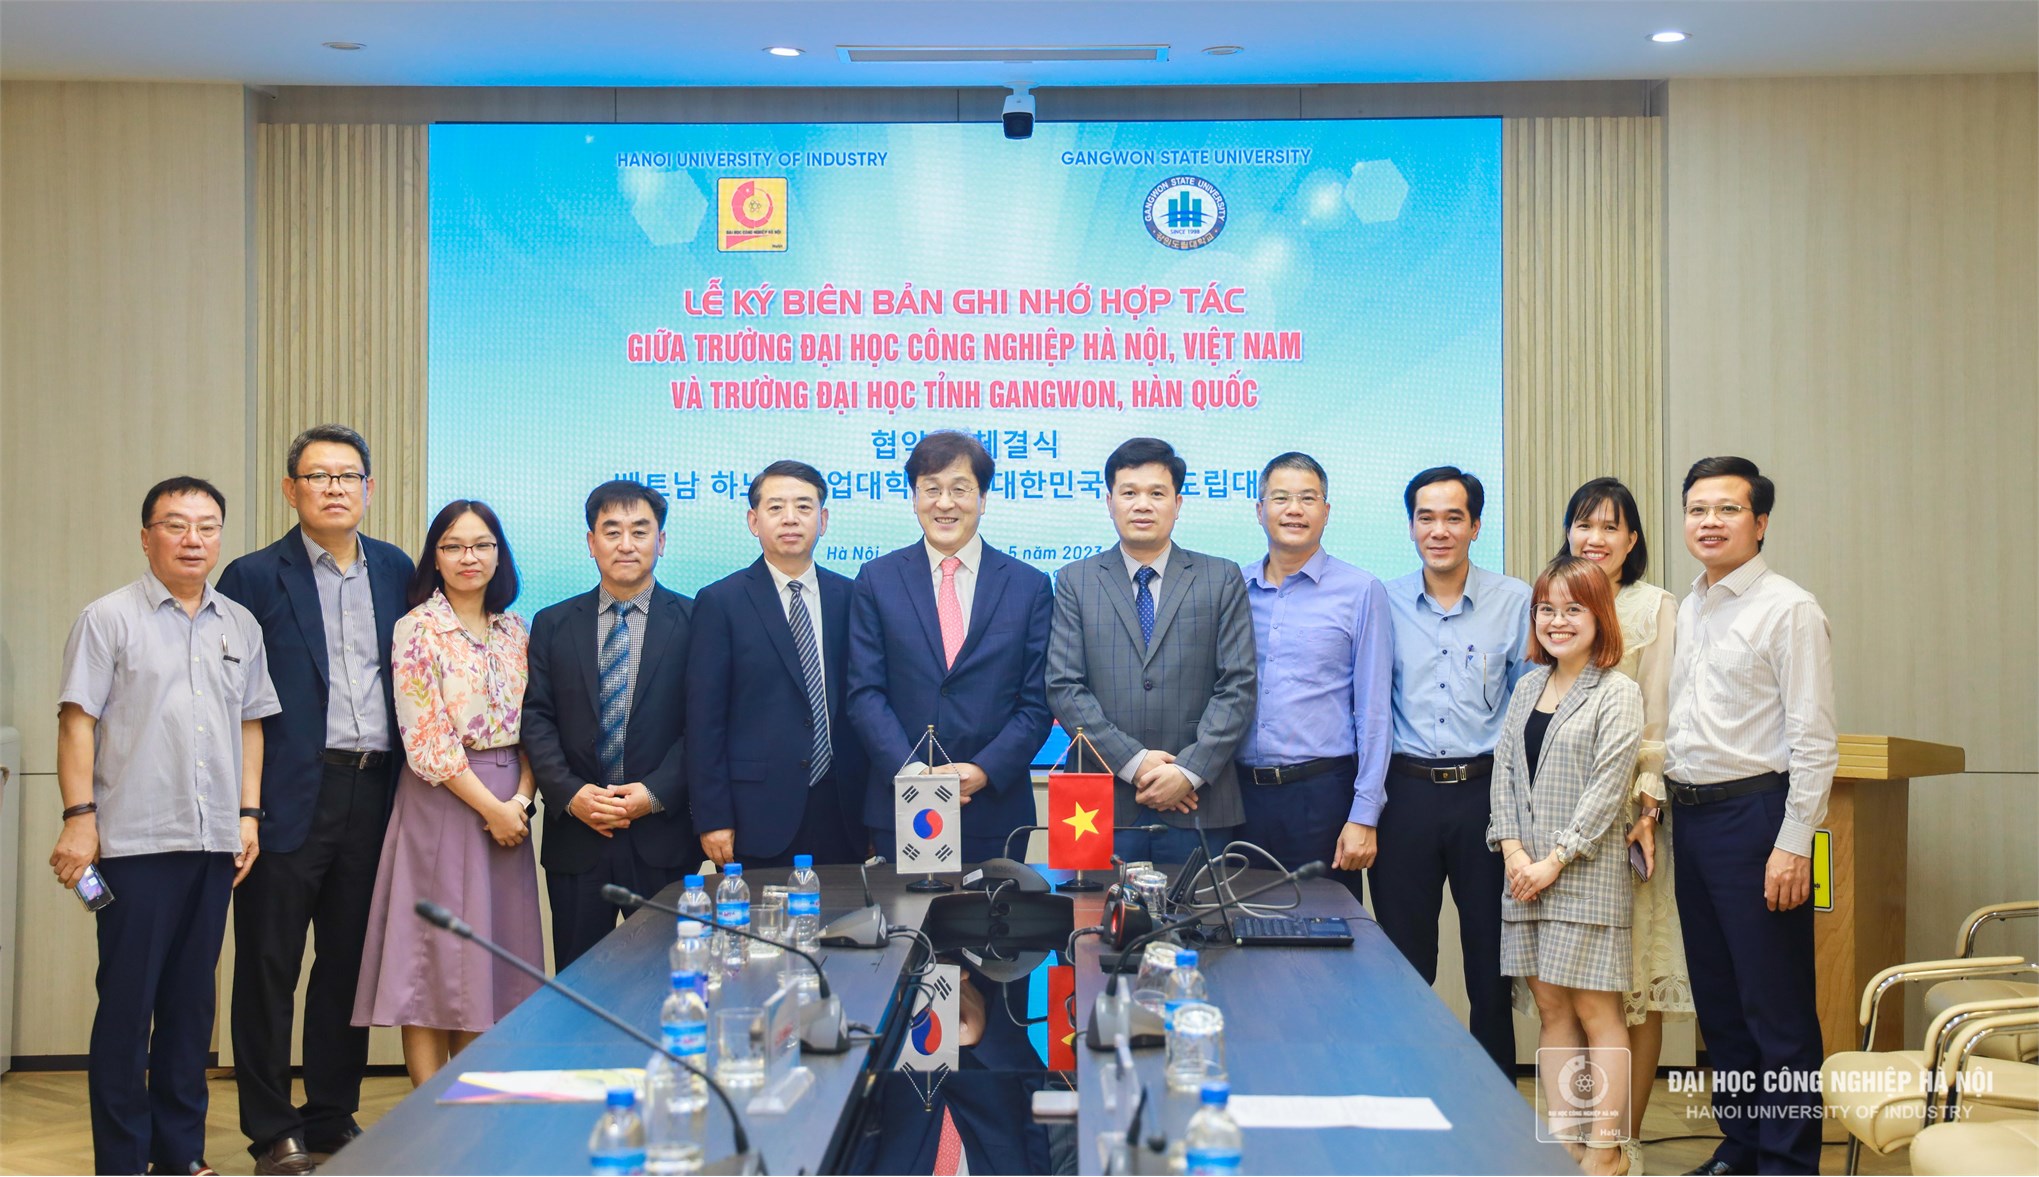 Hanoi University of Industry signed a cooperation agreement with Gangwon State University, Korea